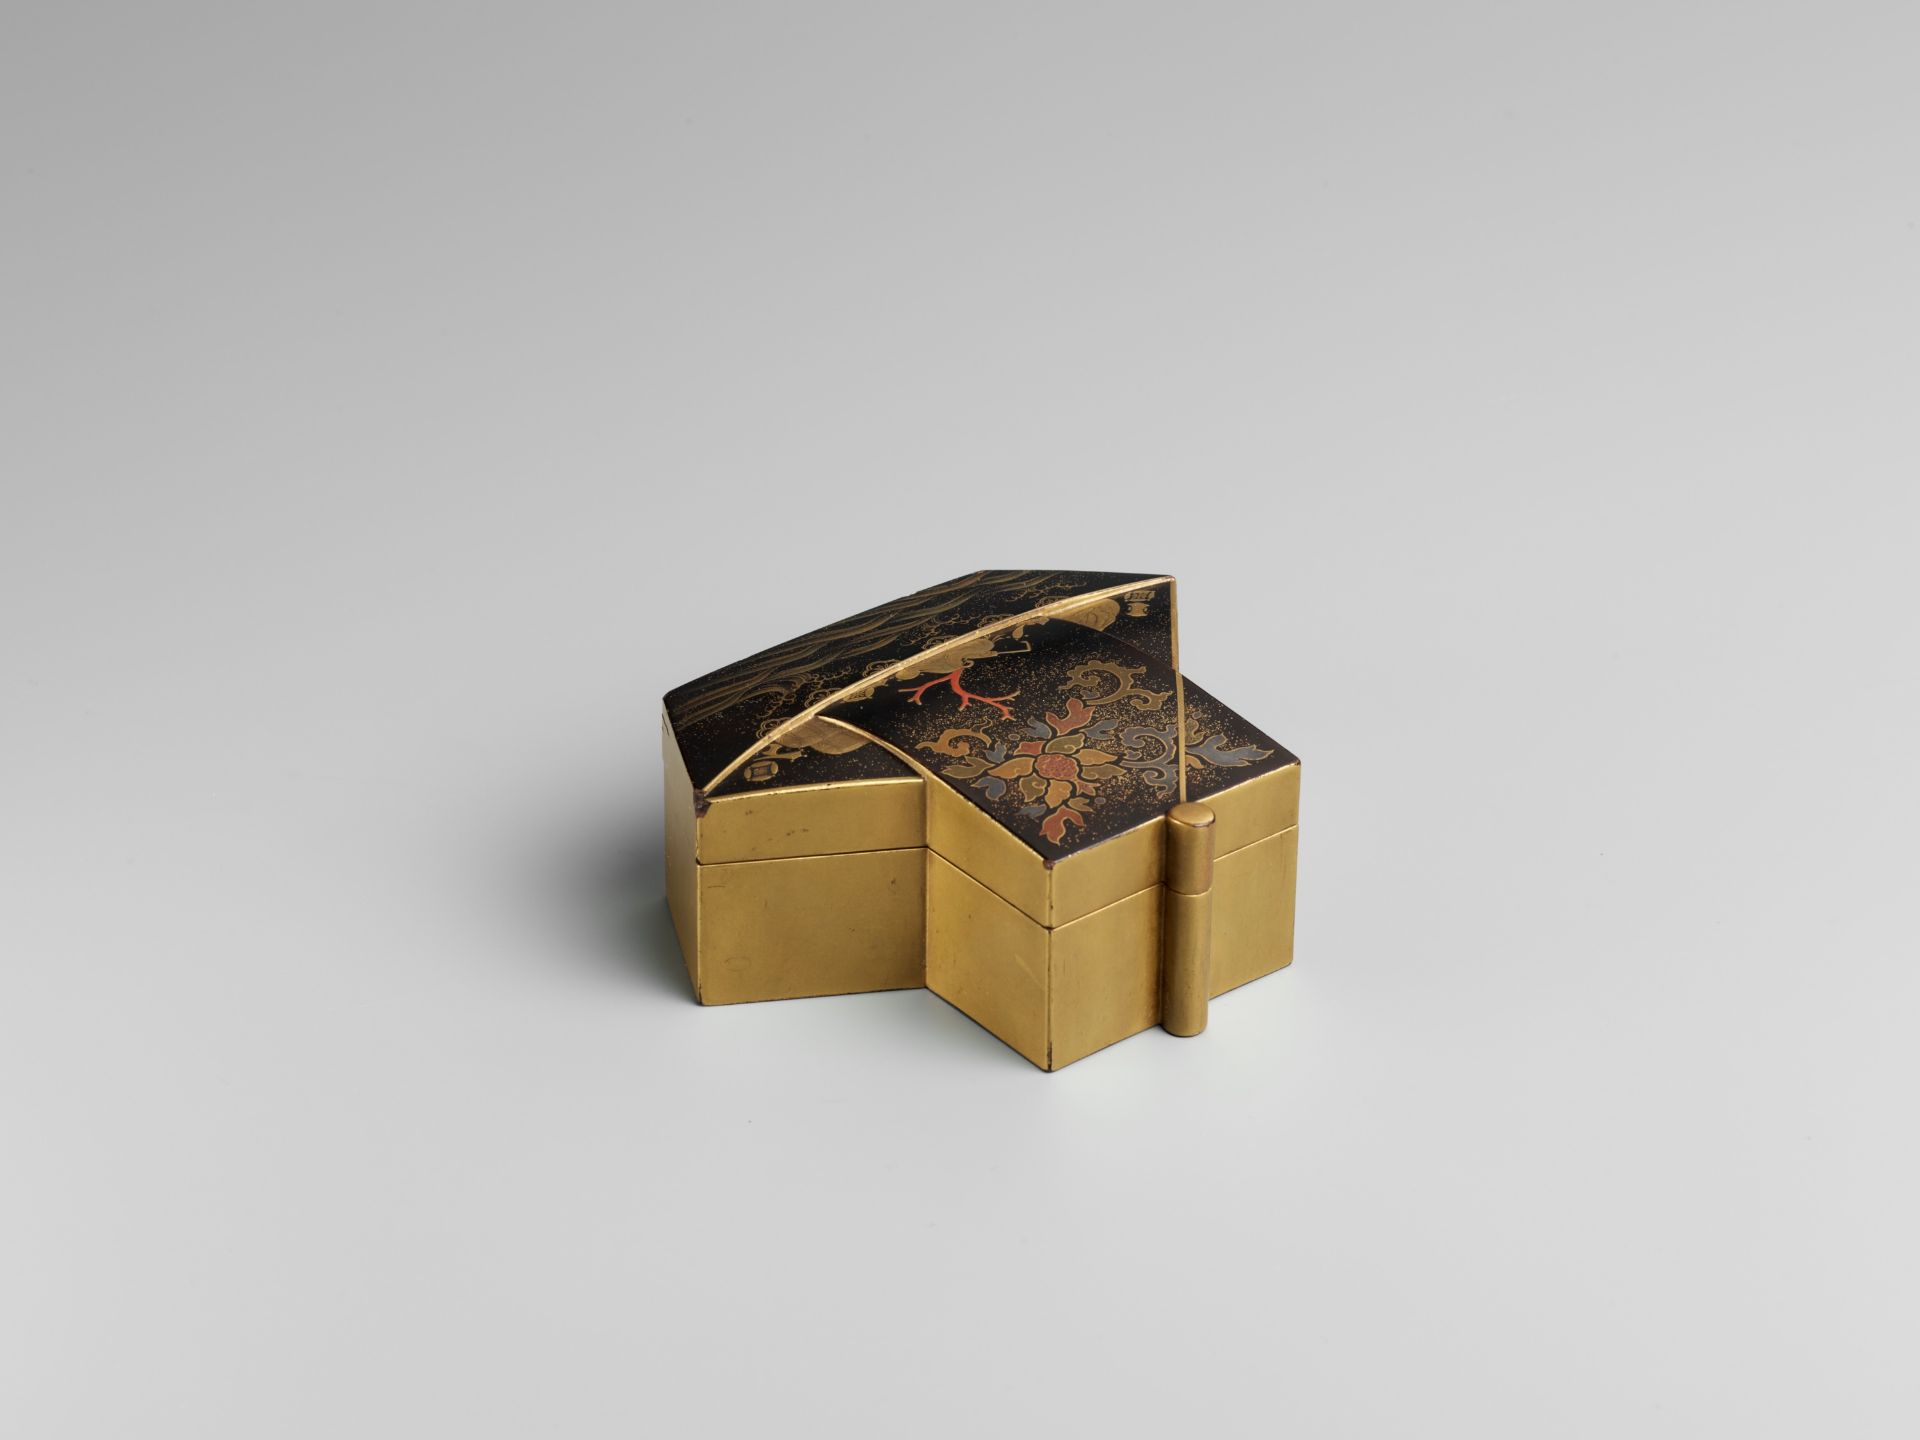 SATO: A RARE BLACK AND GOLD LACQUER KOBAKO AND COVER IN THE FORM OF THE TAKARABUNE (TREASURE SHIP) - Image 10 of 12